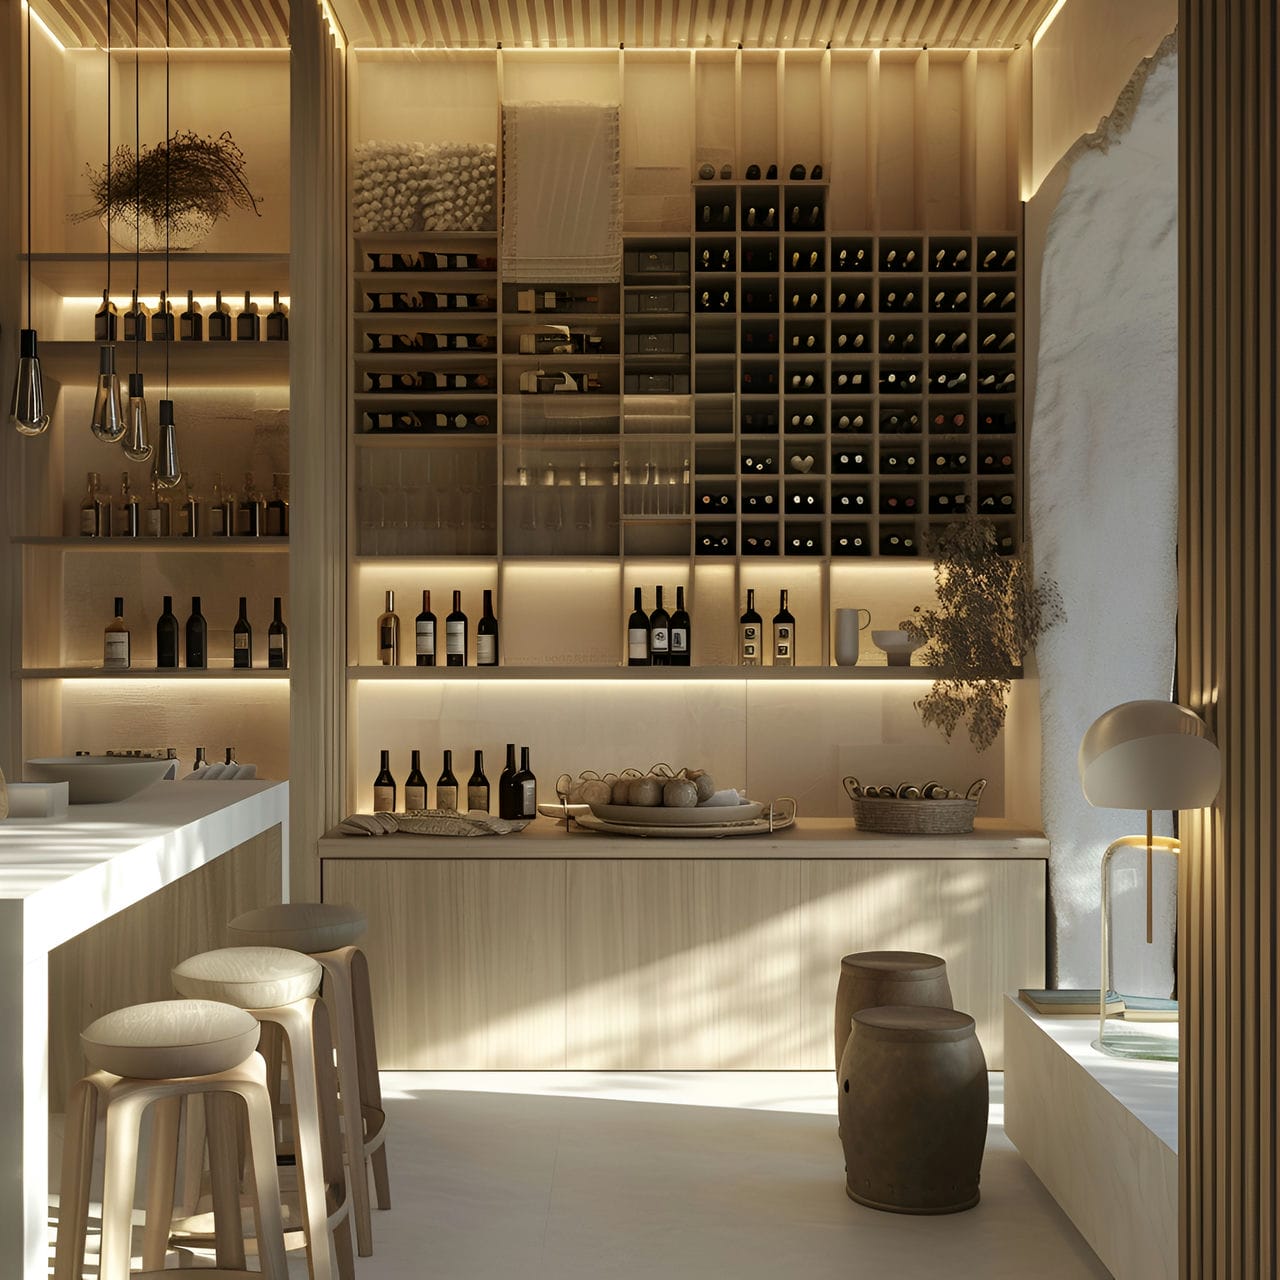 Wine cellar: size, functionality, uses, furniture and renovation